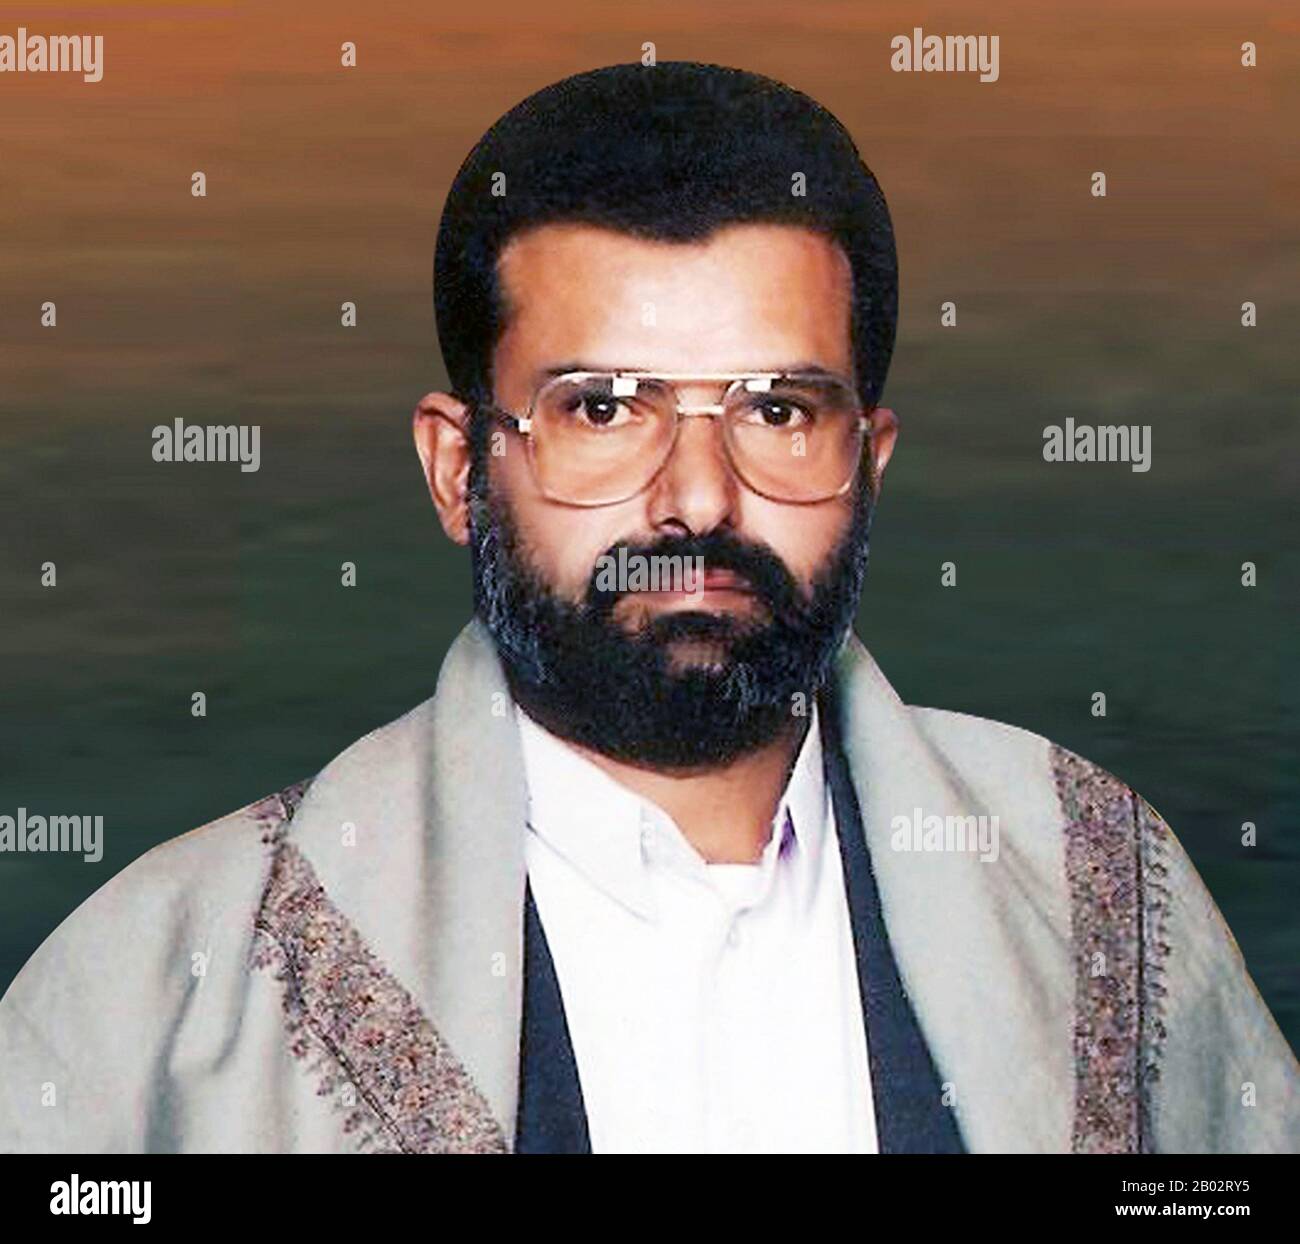 Hussein Badreddin al-Houthi (1956 – 10 September 2004), also spelled Hussein Badr Eddin al-Houthi, was a Zaidi religious leader and former member of the Yemeni parliament for the Al-Haqq Islamic party between 1993 and 1997. He was an instrumental figure in the Houthi insurgency against the Yemeni government, which began in 2004.  Al-Houthi, who was a one-time rising political aspirant in Yemen, had wide religious and tribal backing in northern Yemen's mountainous regions. The Houthis movement took his name after his death in 2004. Stock Photo